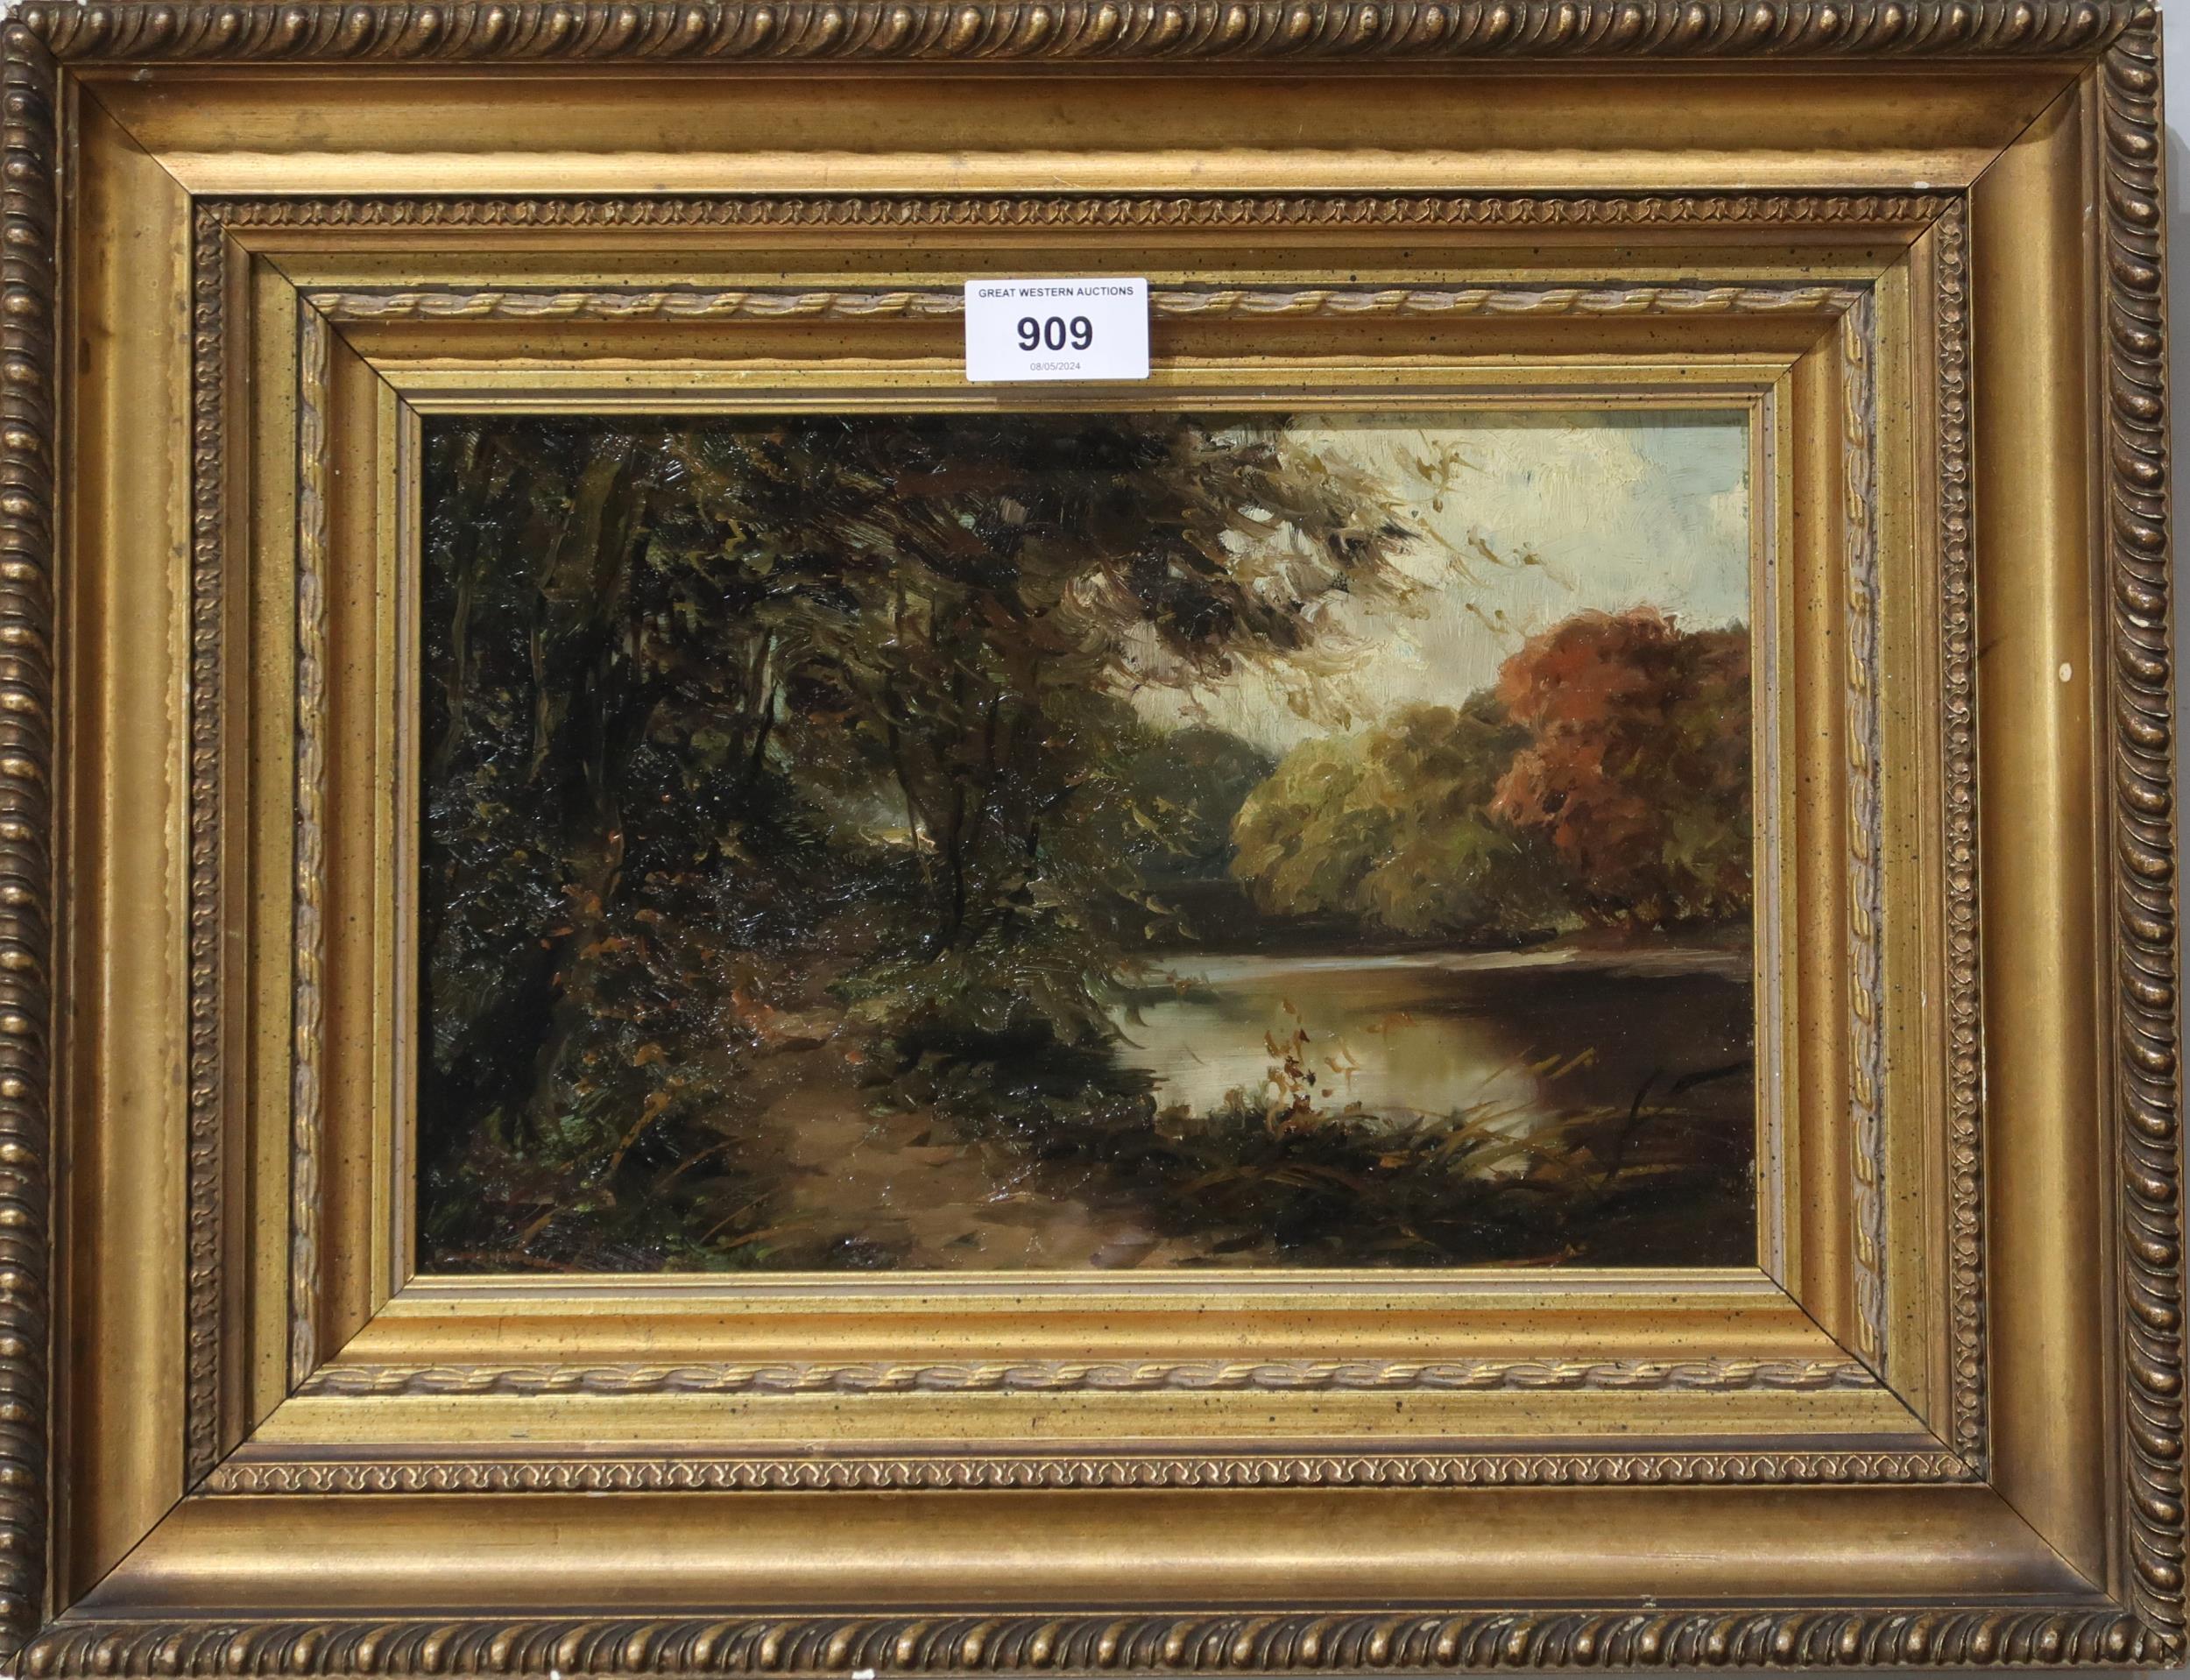 SCOTTISH SCHOOL  A QUIET POOL ON A LOWLAND RIVER  Oil on board, signed J. Smart verso, 17.5 x - Image 2 of 4